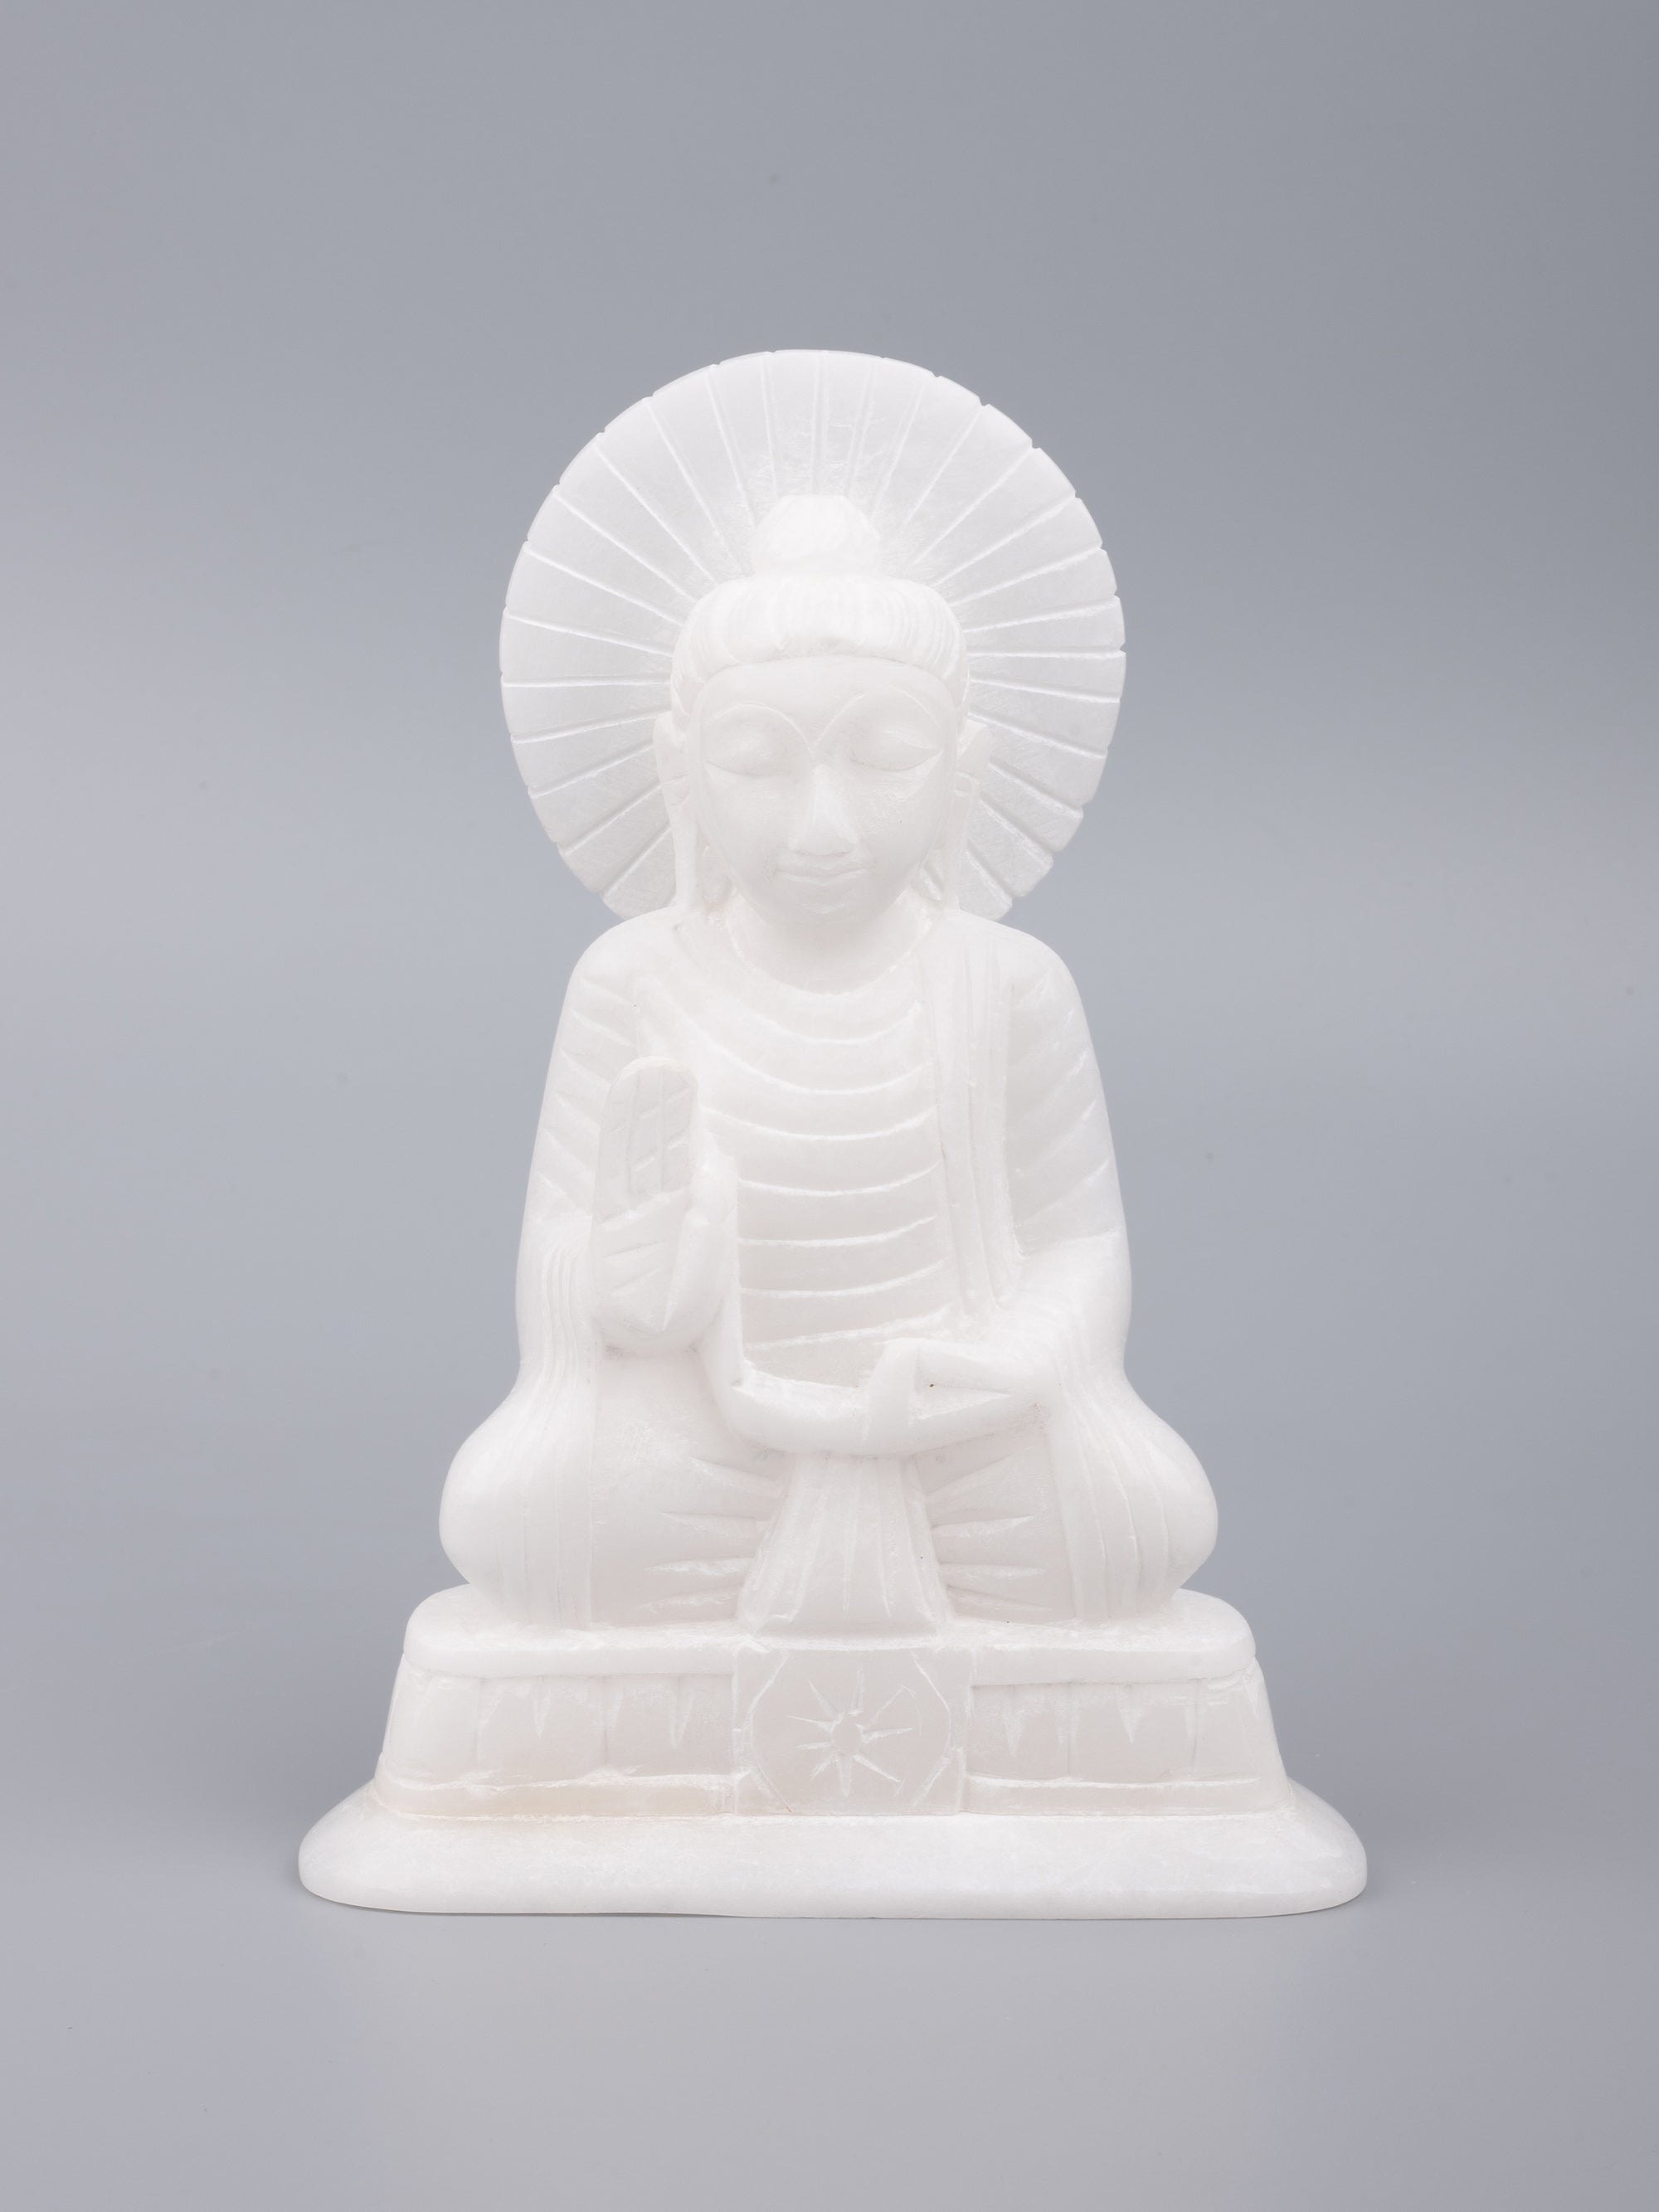 White marble goddess buddha statue - 6 inches height - The Heritage Artifacts